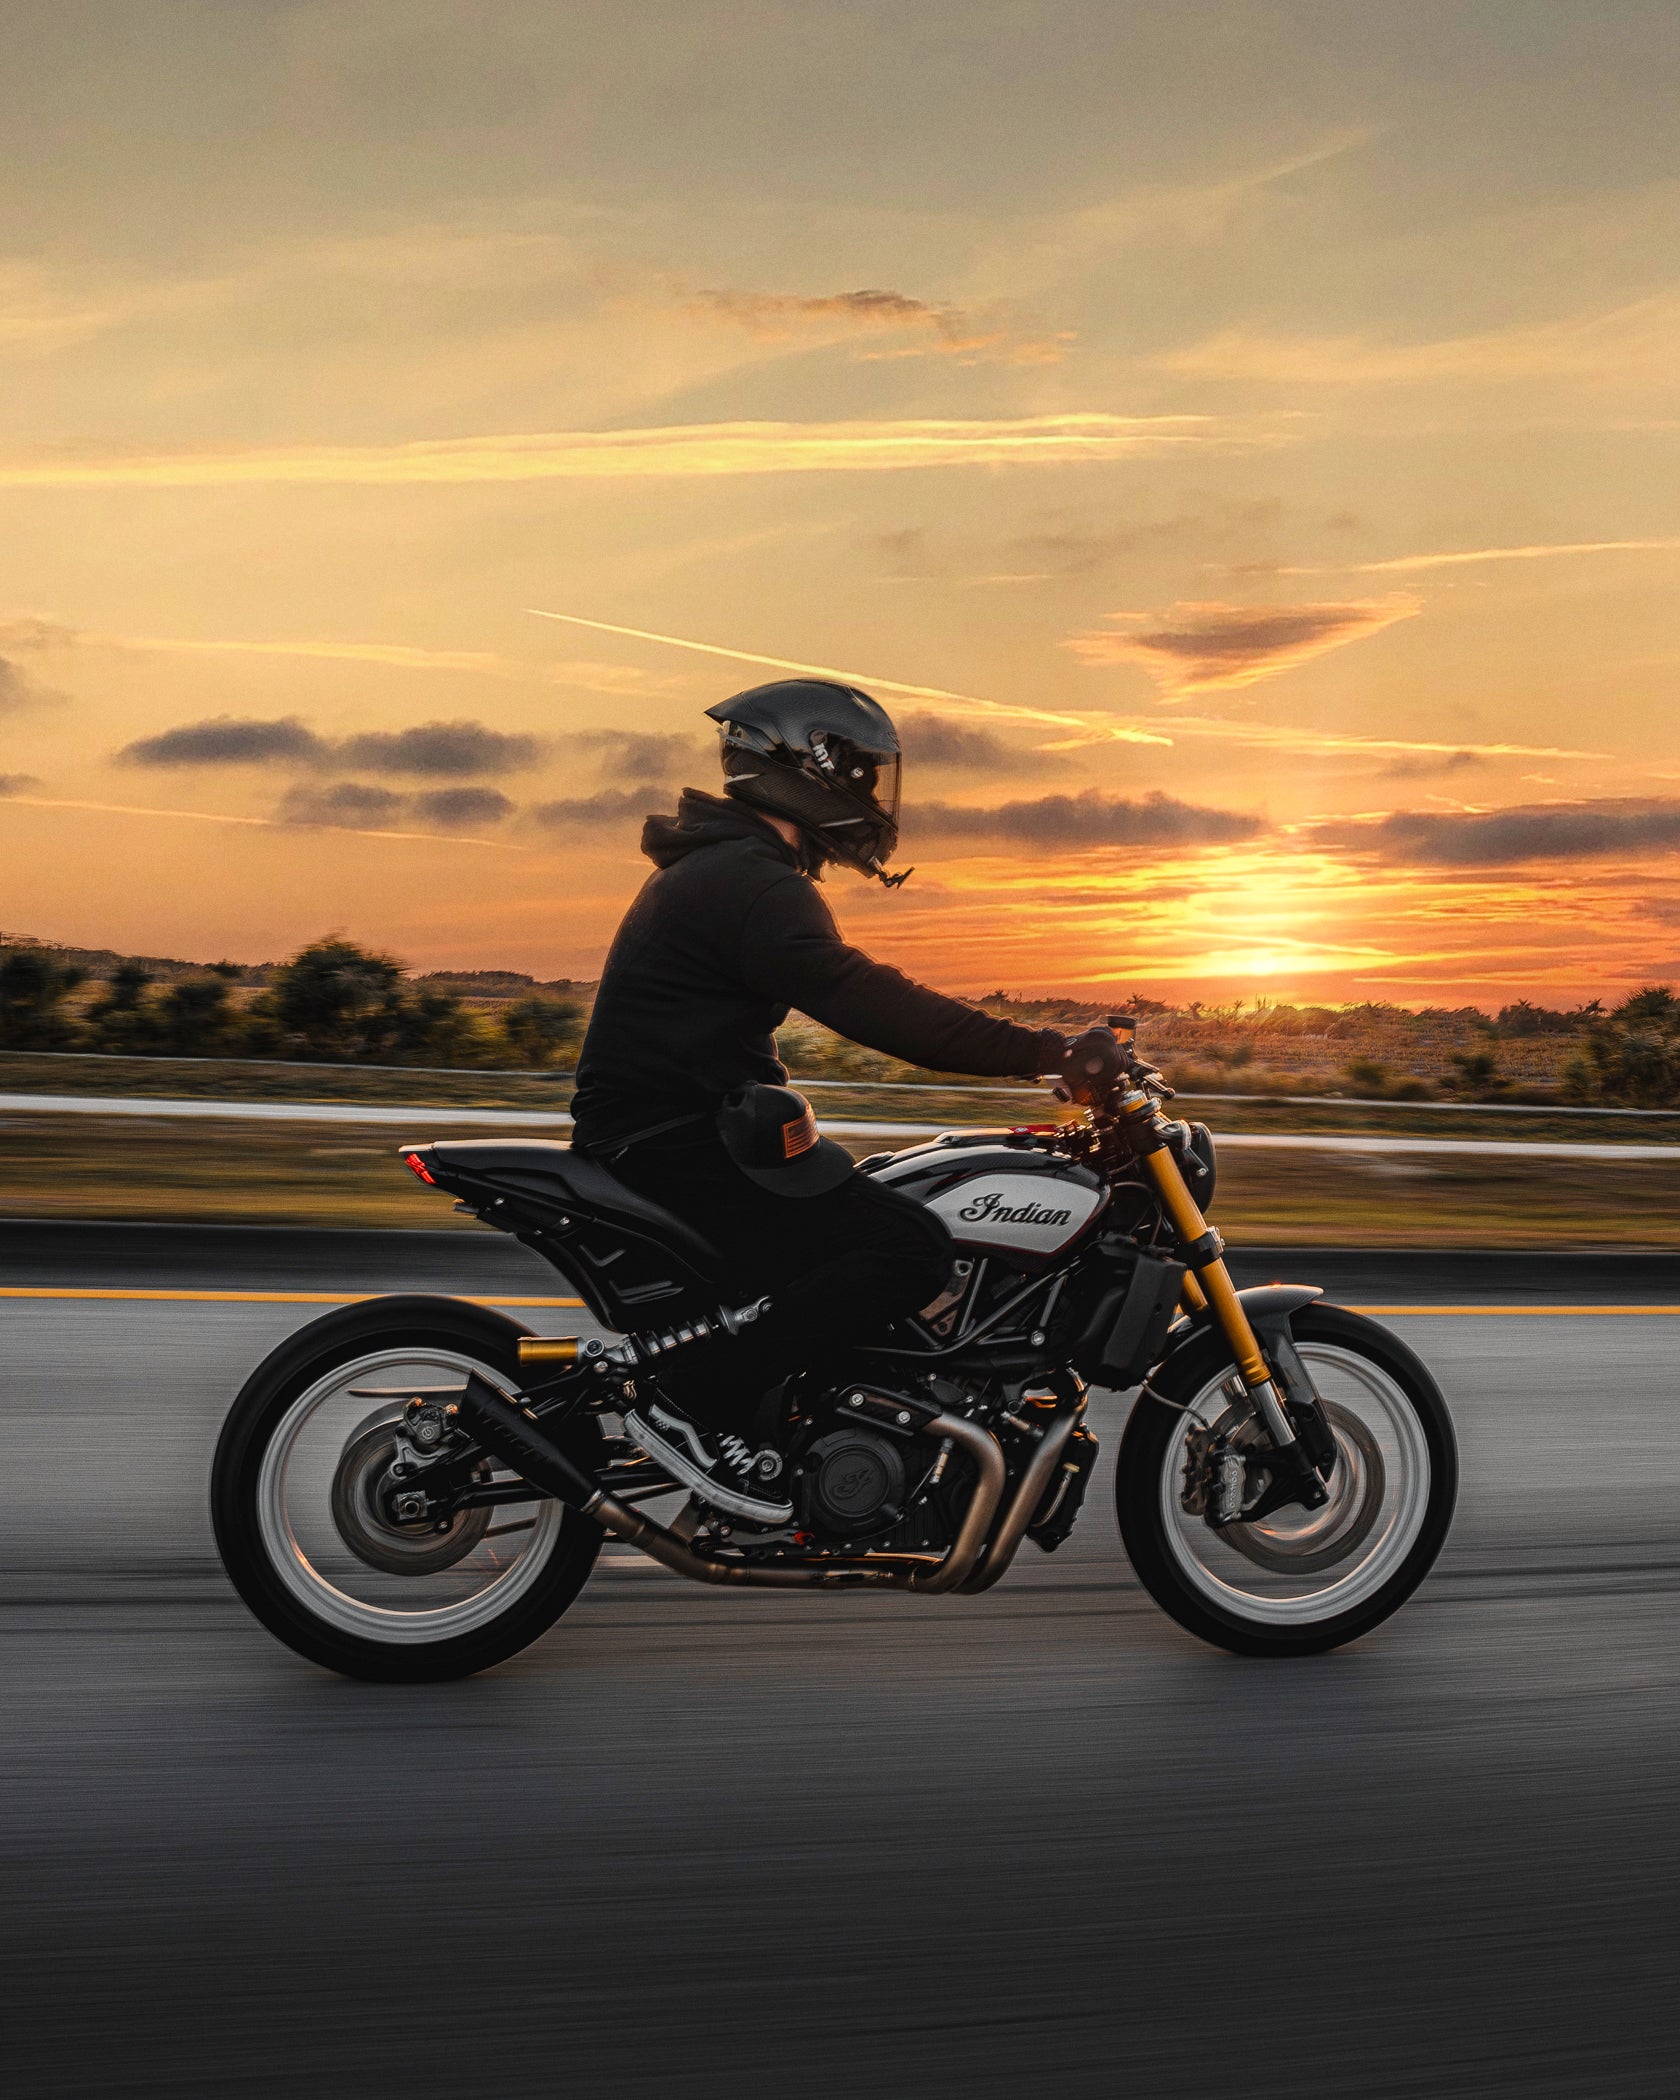 Motorcyclist riding an Indian motorcycle at sunset on an open road.